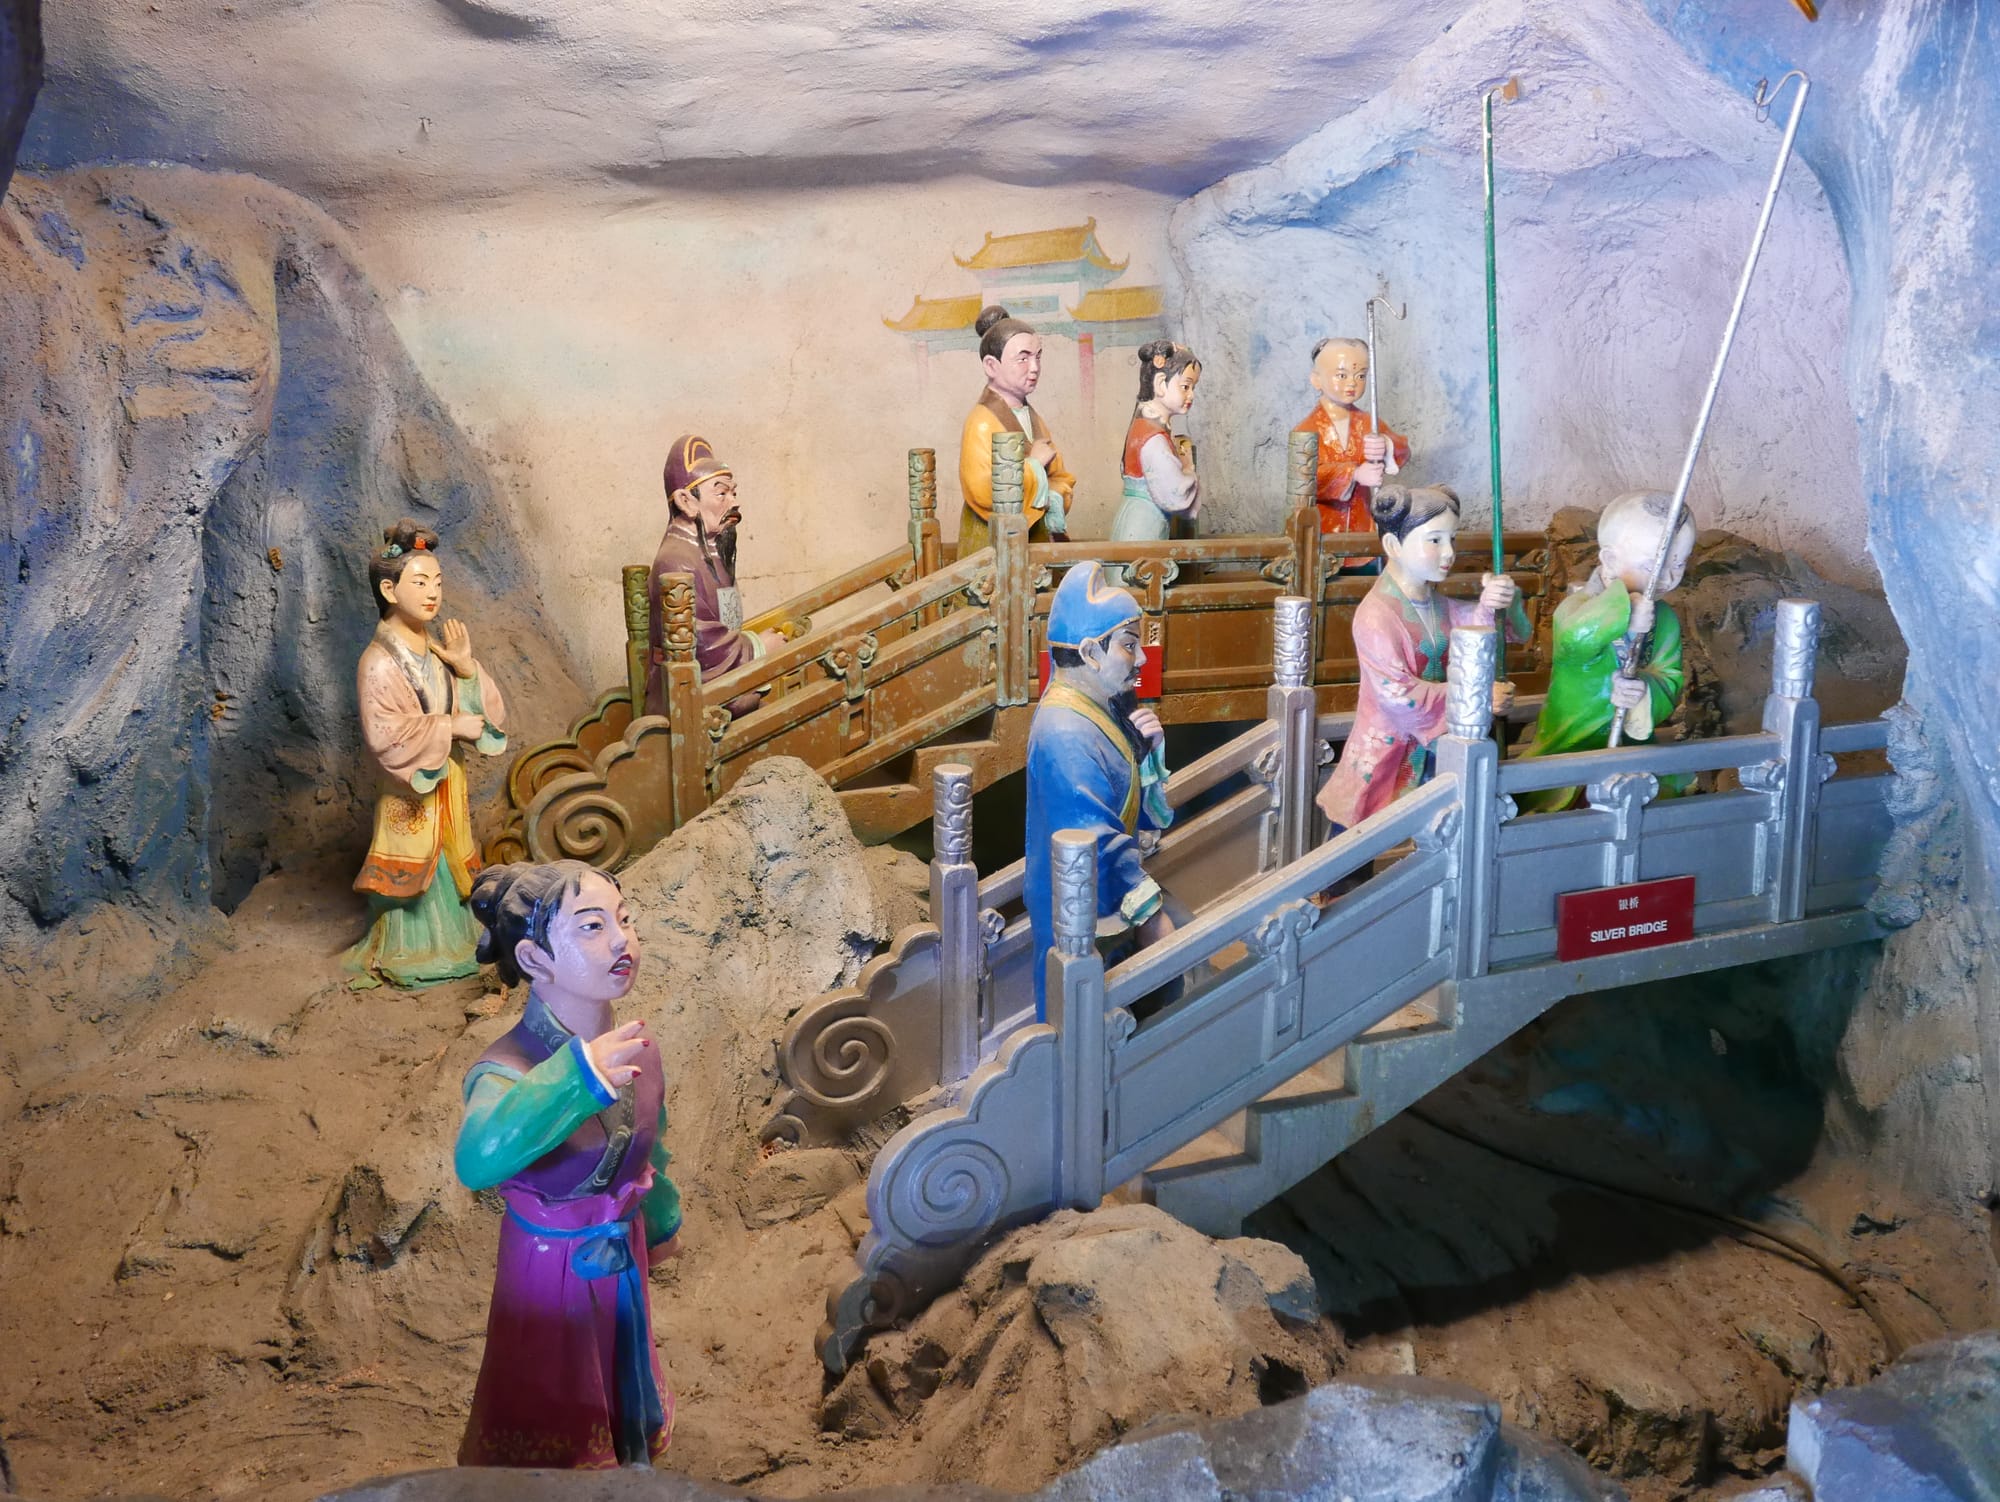 Photo by Author — the First Court of Hell, judgement (King Qinguang) — 10 Courts of Hell, Haw Par Villa, Singapore